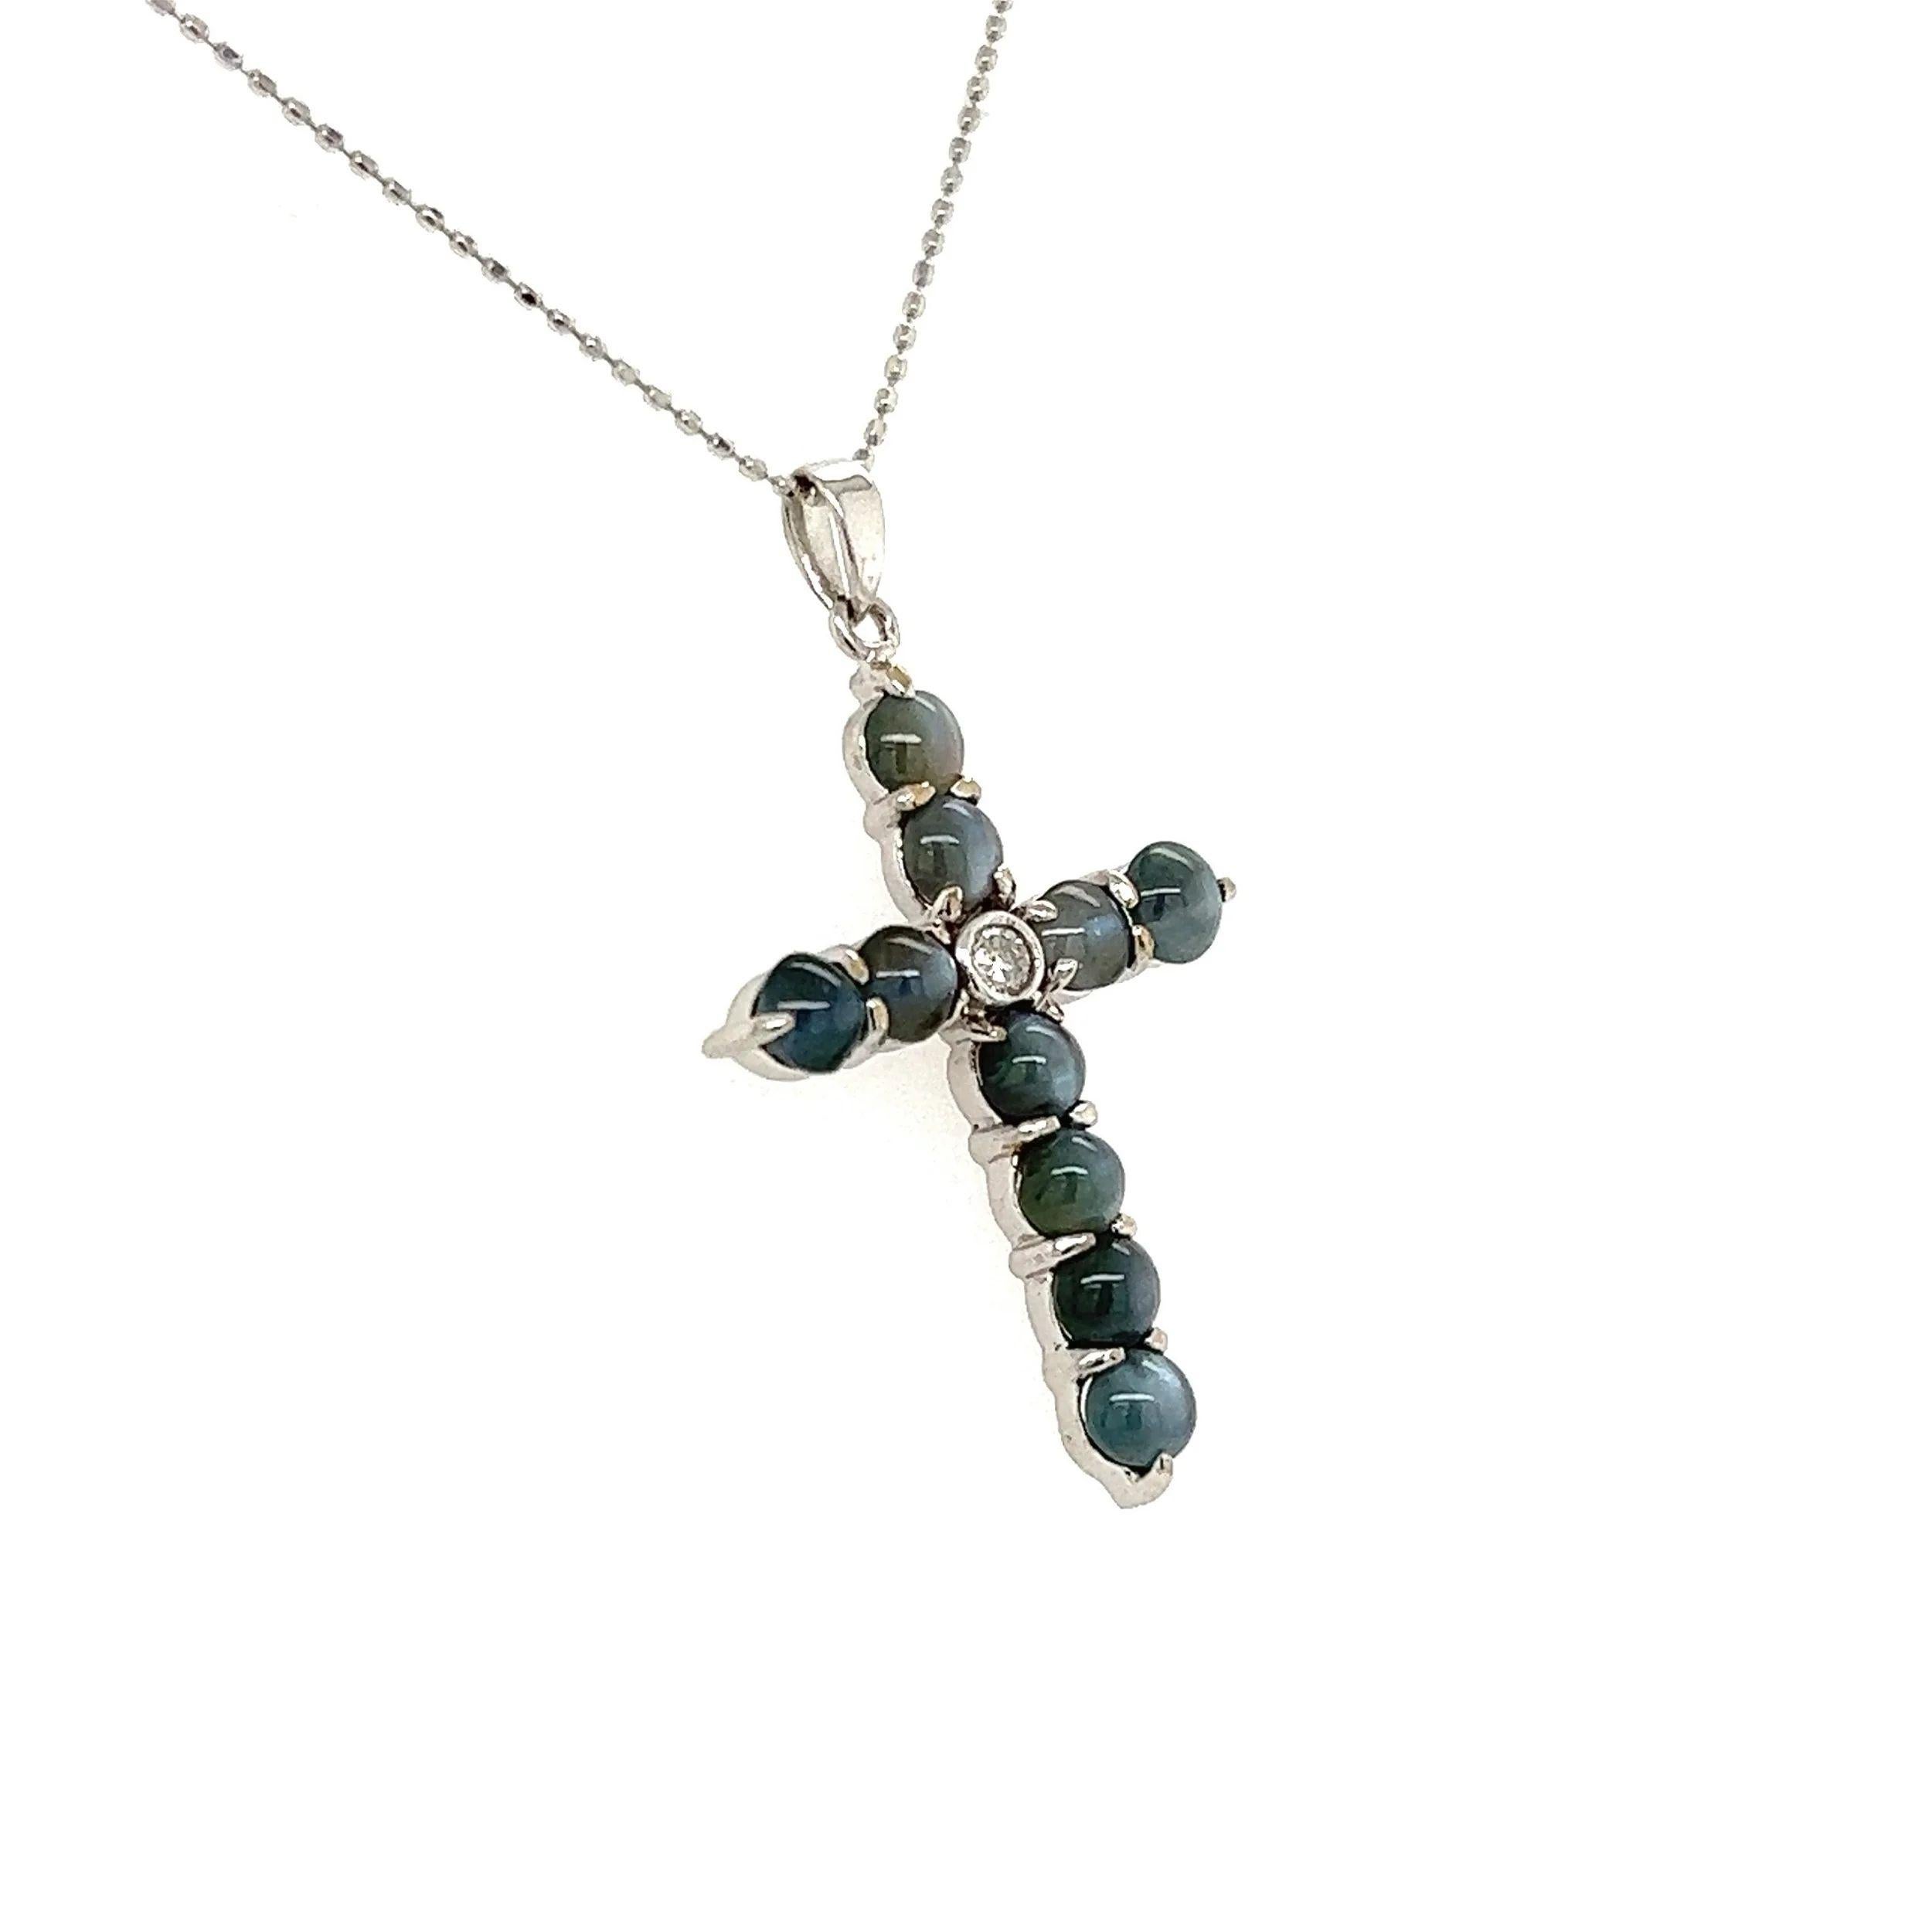 Simply Beautiful! Finely Detailed Cat’s Eye Chrysoberyl and Diamond Gold Cross. Hand set with Cat’s Eye Chrysoberyl weighing approx. 2.48tcw and centering a 0.05 Carat Diamond. Hand crafted in 18K White Gold. Suspended from a 16” Gold Link Chain.